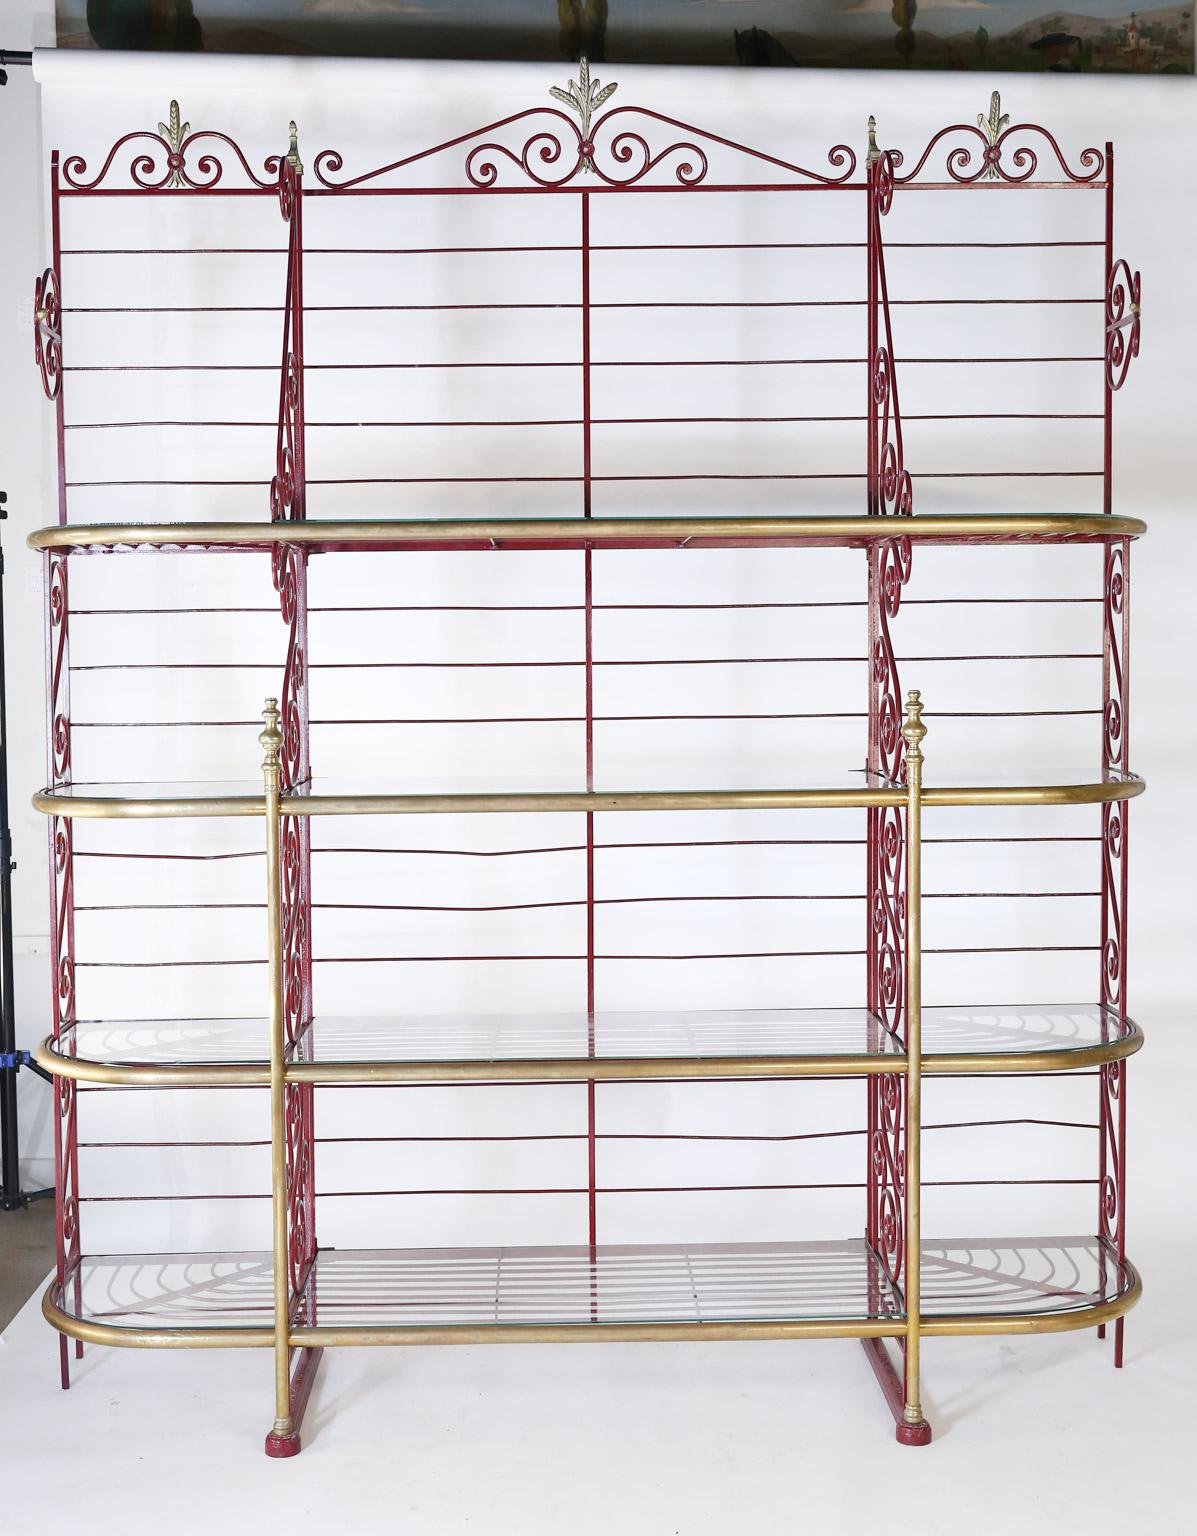 This is an early 20th century bakers rack made of iron with brass trim. The makers name, Echalie and Biabaud, Paris is embossed on the cast iron feet. The metal shelves are topped with glass providing a sturdy flat surface for displaying items of